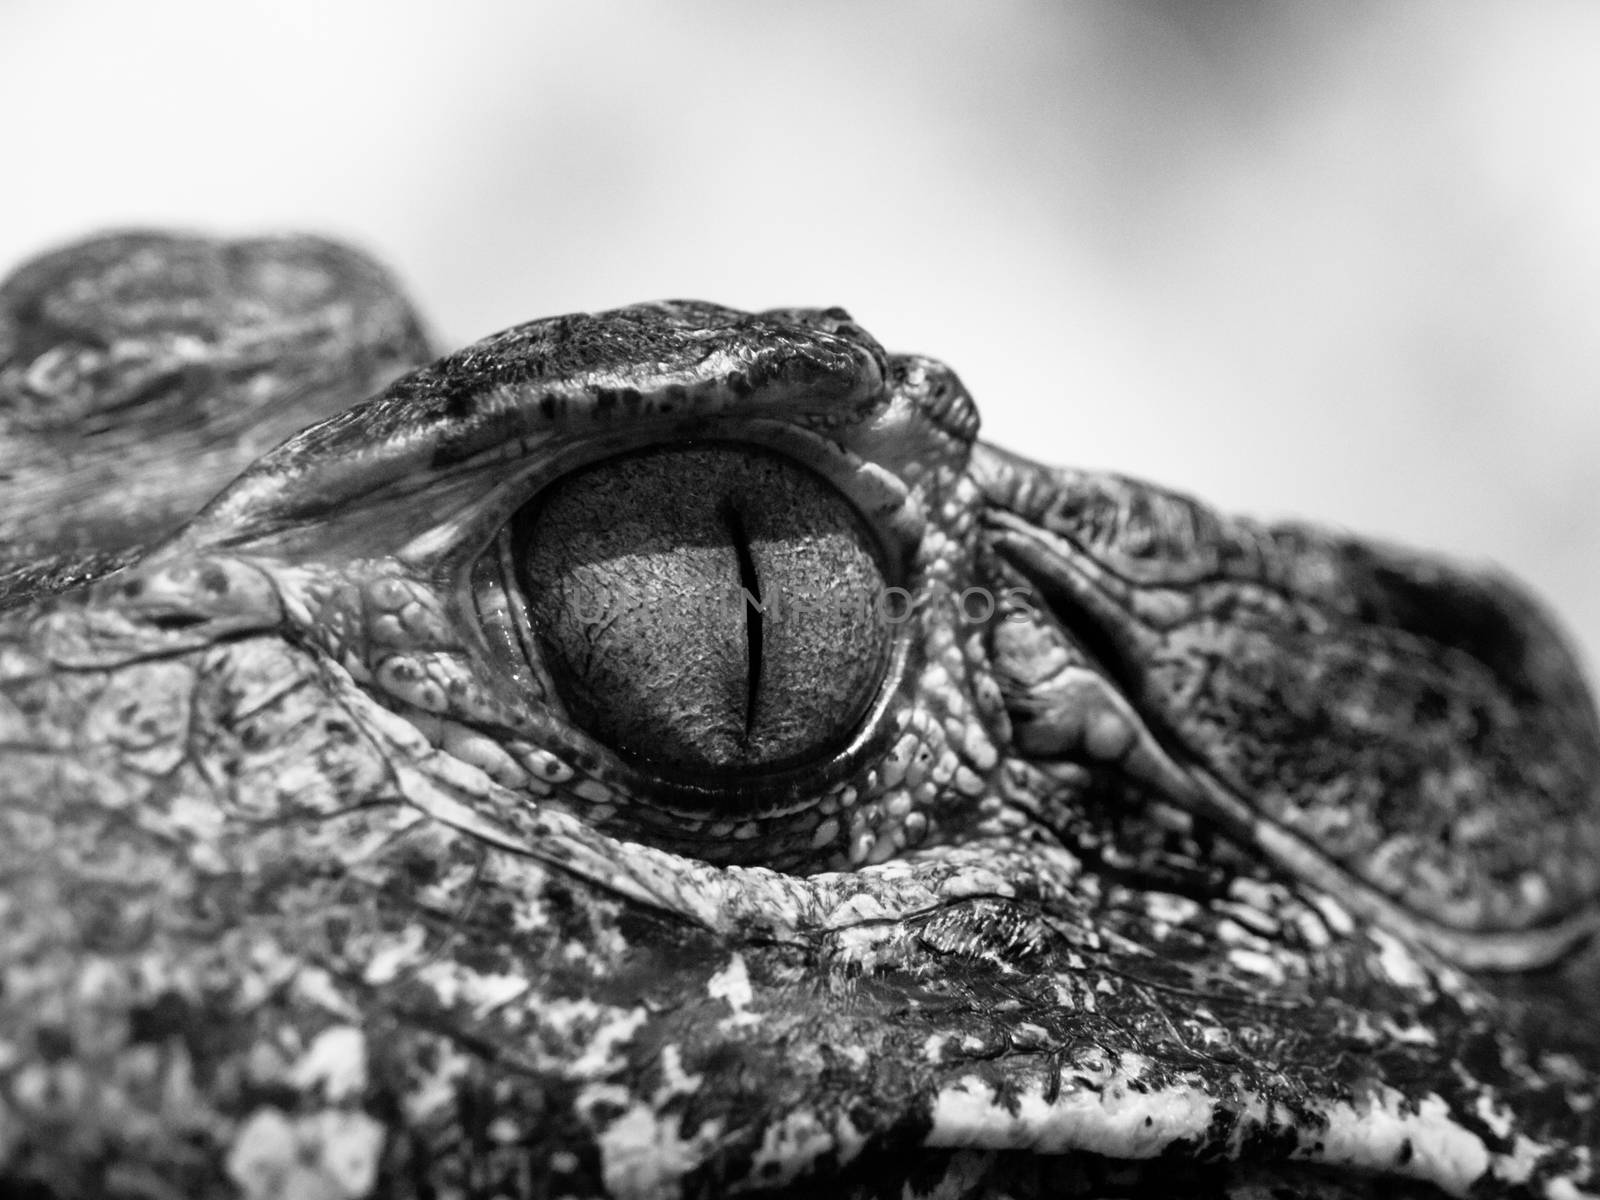 Eye of caiman in close-up view. Black and white image.